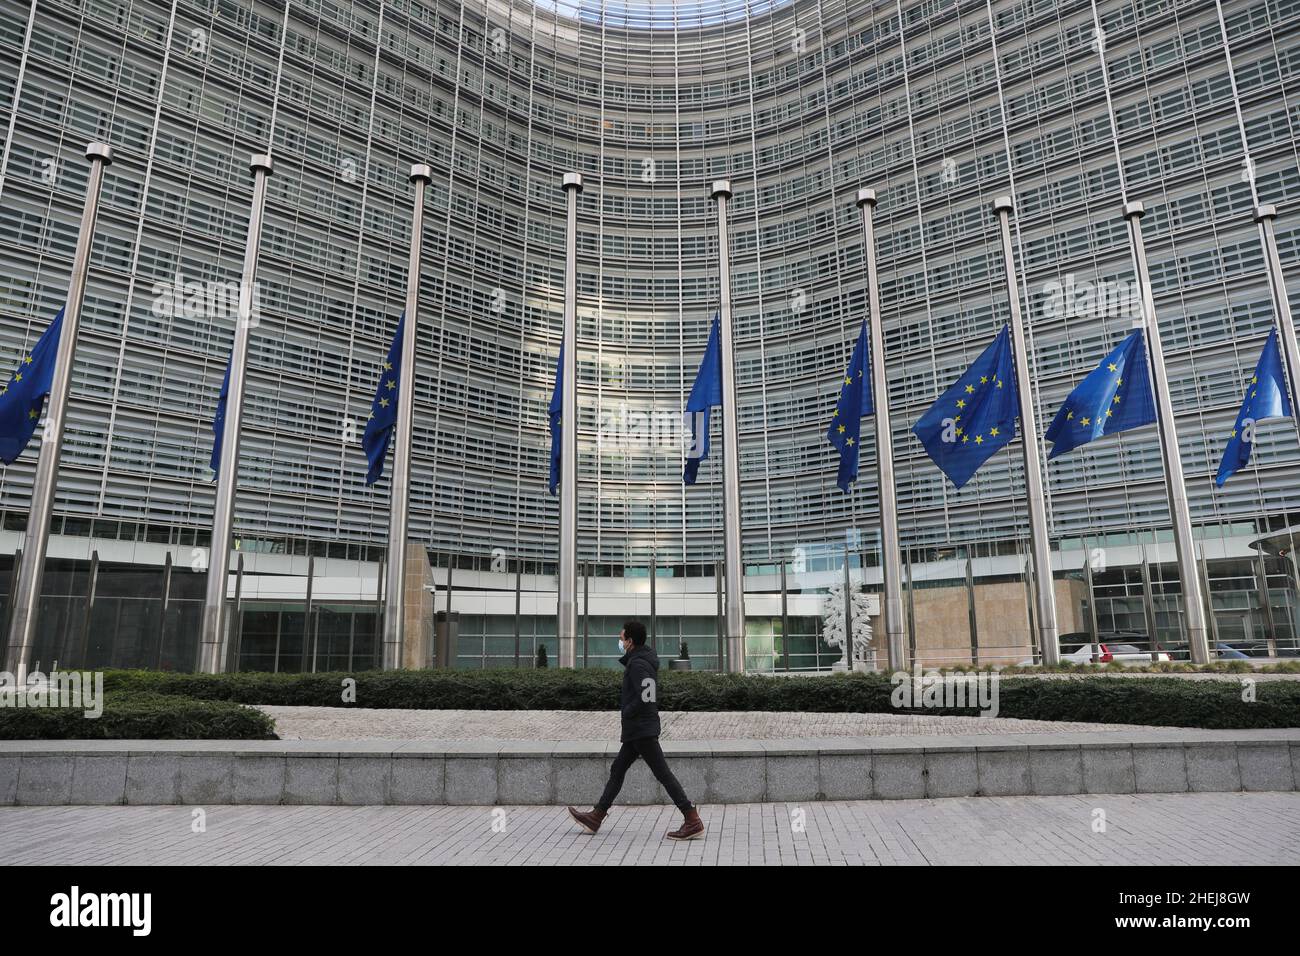 BRUSSELS, Jan. 11, 2022 (Xinhua) -- The EU flags fly at half-mast as a tribute to European Parliament President David Sassoli, outside the European Commission in Brussels, Belgium, Jan. 11, 2022. European Parliament President David Sassoli died at age 65 at a hospital in Italy early Tuesday, his spokesperson has said.Sassoli, born on May 30, 1956, in Florence, Italy, had been hospitalized for more than two weeks due to a serious complication relating to immune system dysfunction. Stock Photo